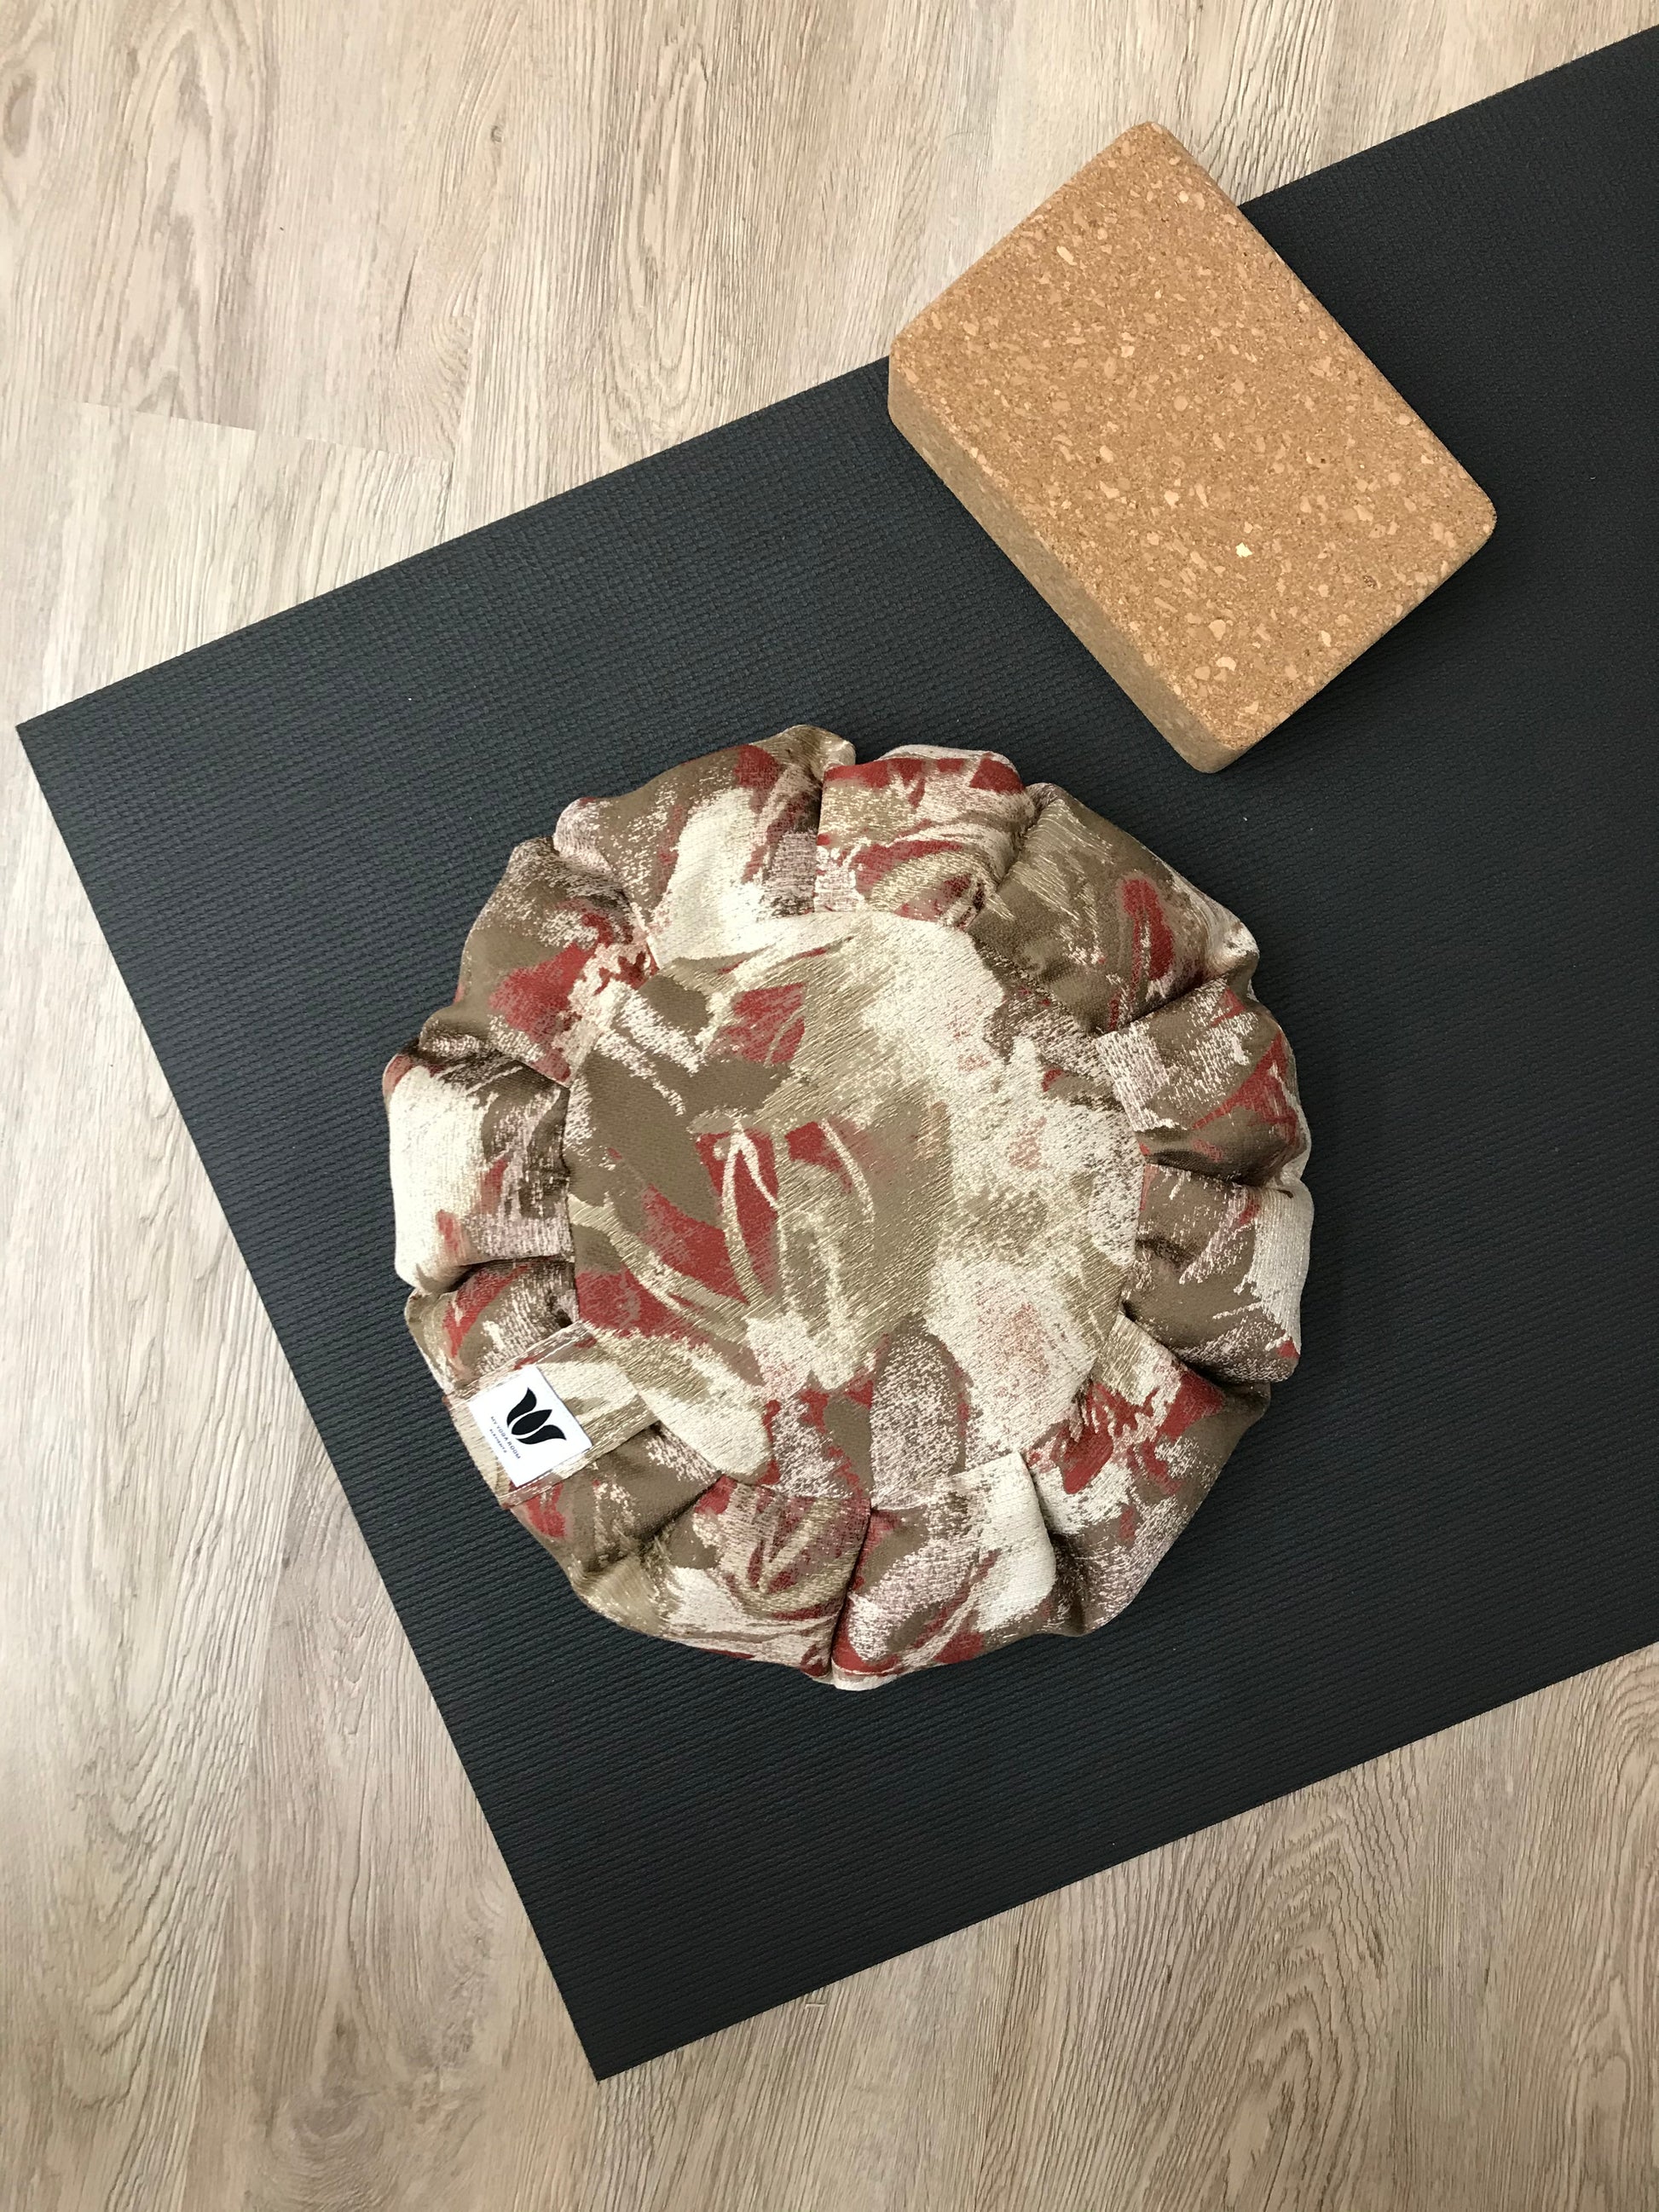 Handcrafted premium cotton sateen fabric meditation seat cushion in rich autumn water colour print fabric. Align the spine and body in comfort to calm the monkey mind in your meditation practice. Handcrafted in Calgary, Alberta Canada